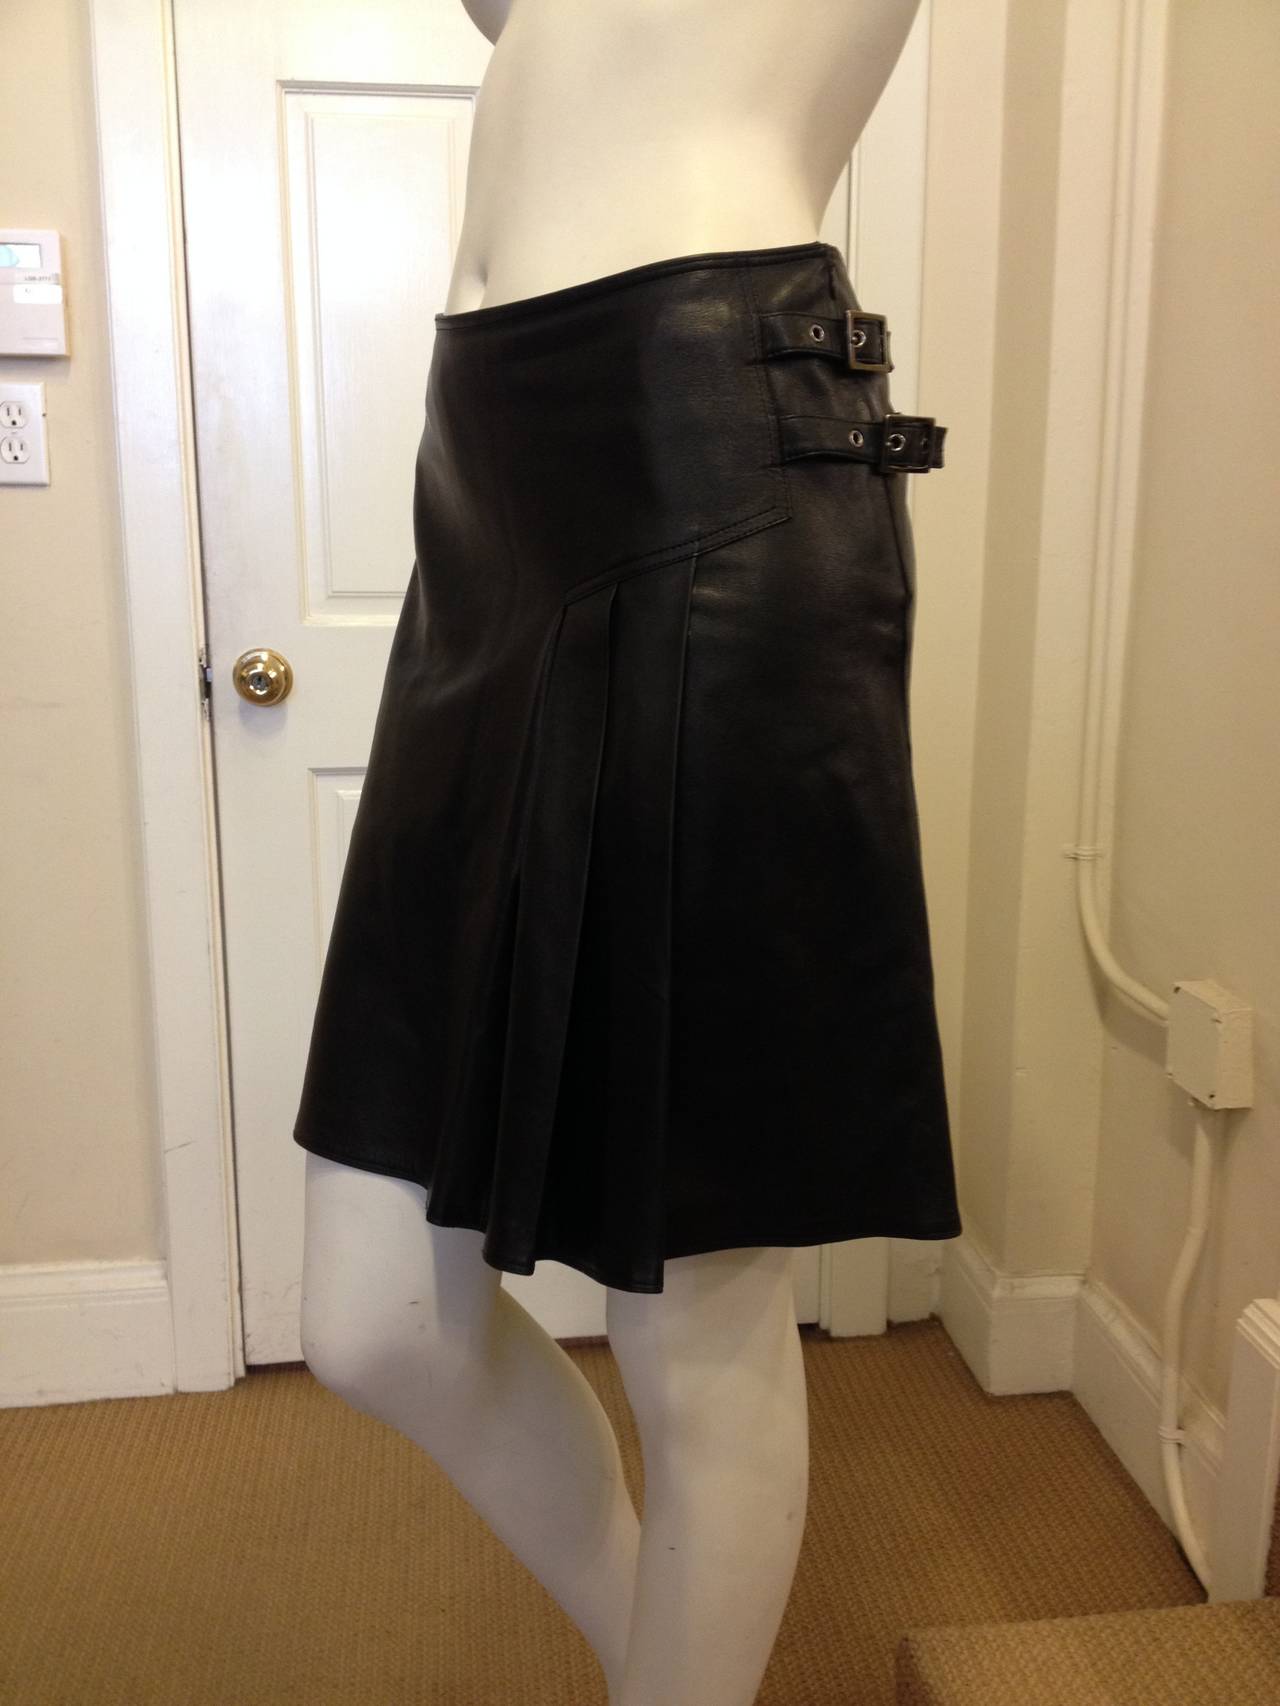 Accented with two silver buckles and three pleats on one hip, this asymmetrical black leather skirt  is certainly edgier than most of the iconic soft, sculptural, floral Dior creations. The defined but minimal silhouette borrow from classic Dior